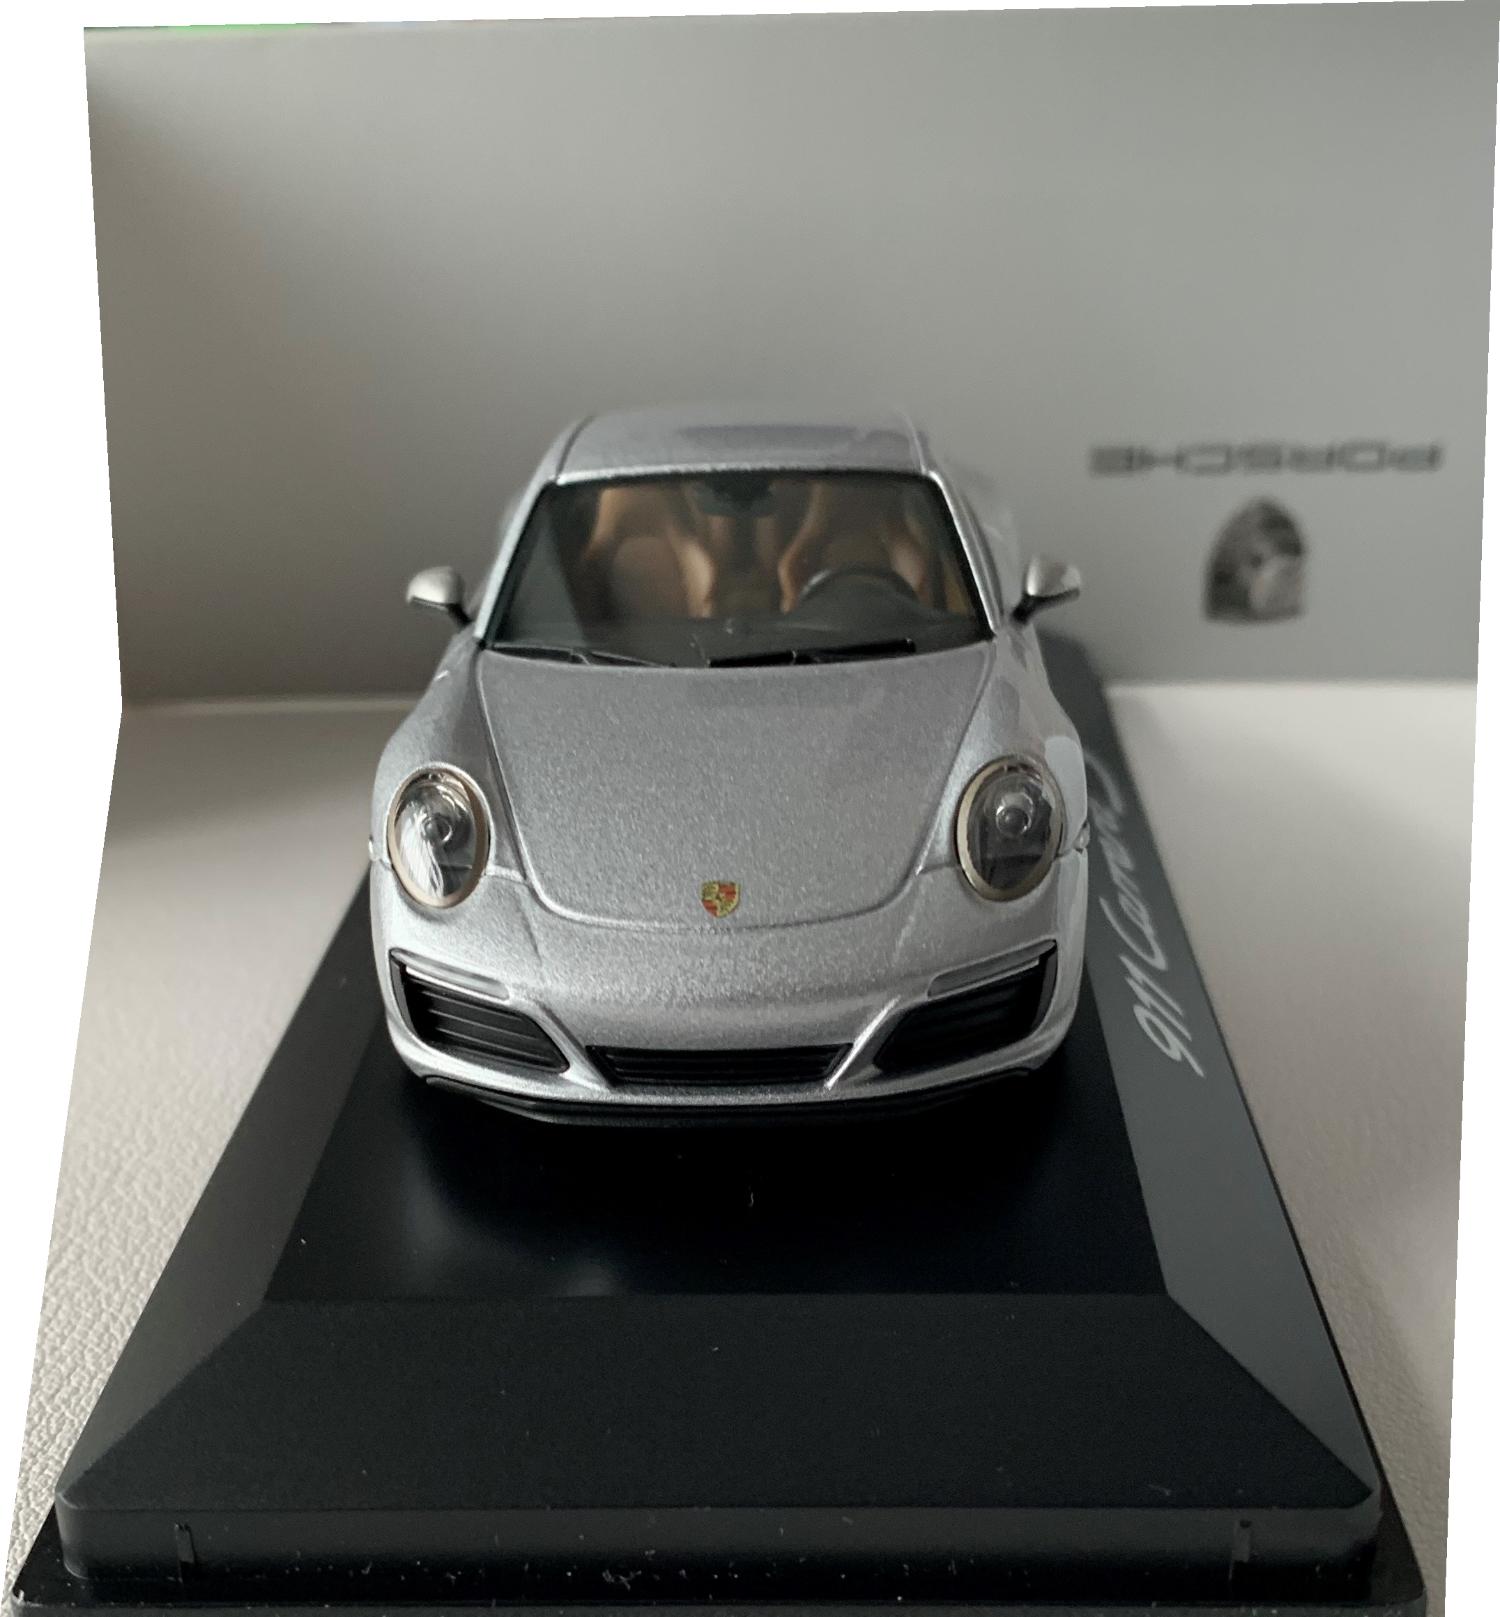 An excellent reproduction of the Porsche 911 Carrera S Coupe with detail throughout, all authentically recreated. Model is mounted on a removable plinth with a removable hard plastic cover and presented in Porsche packaging